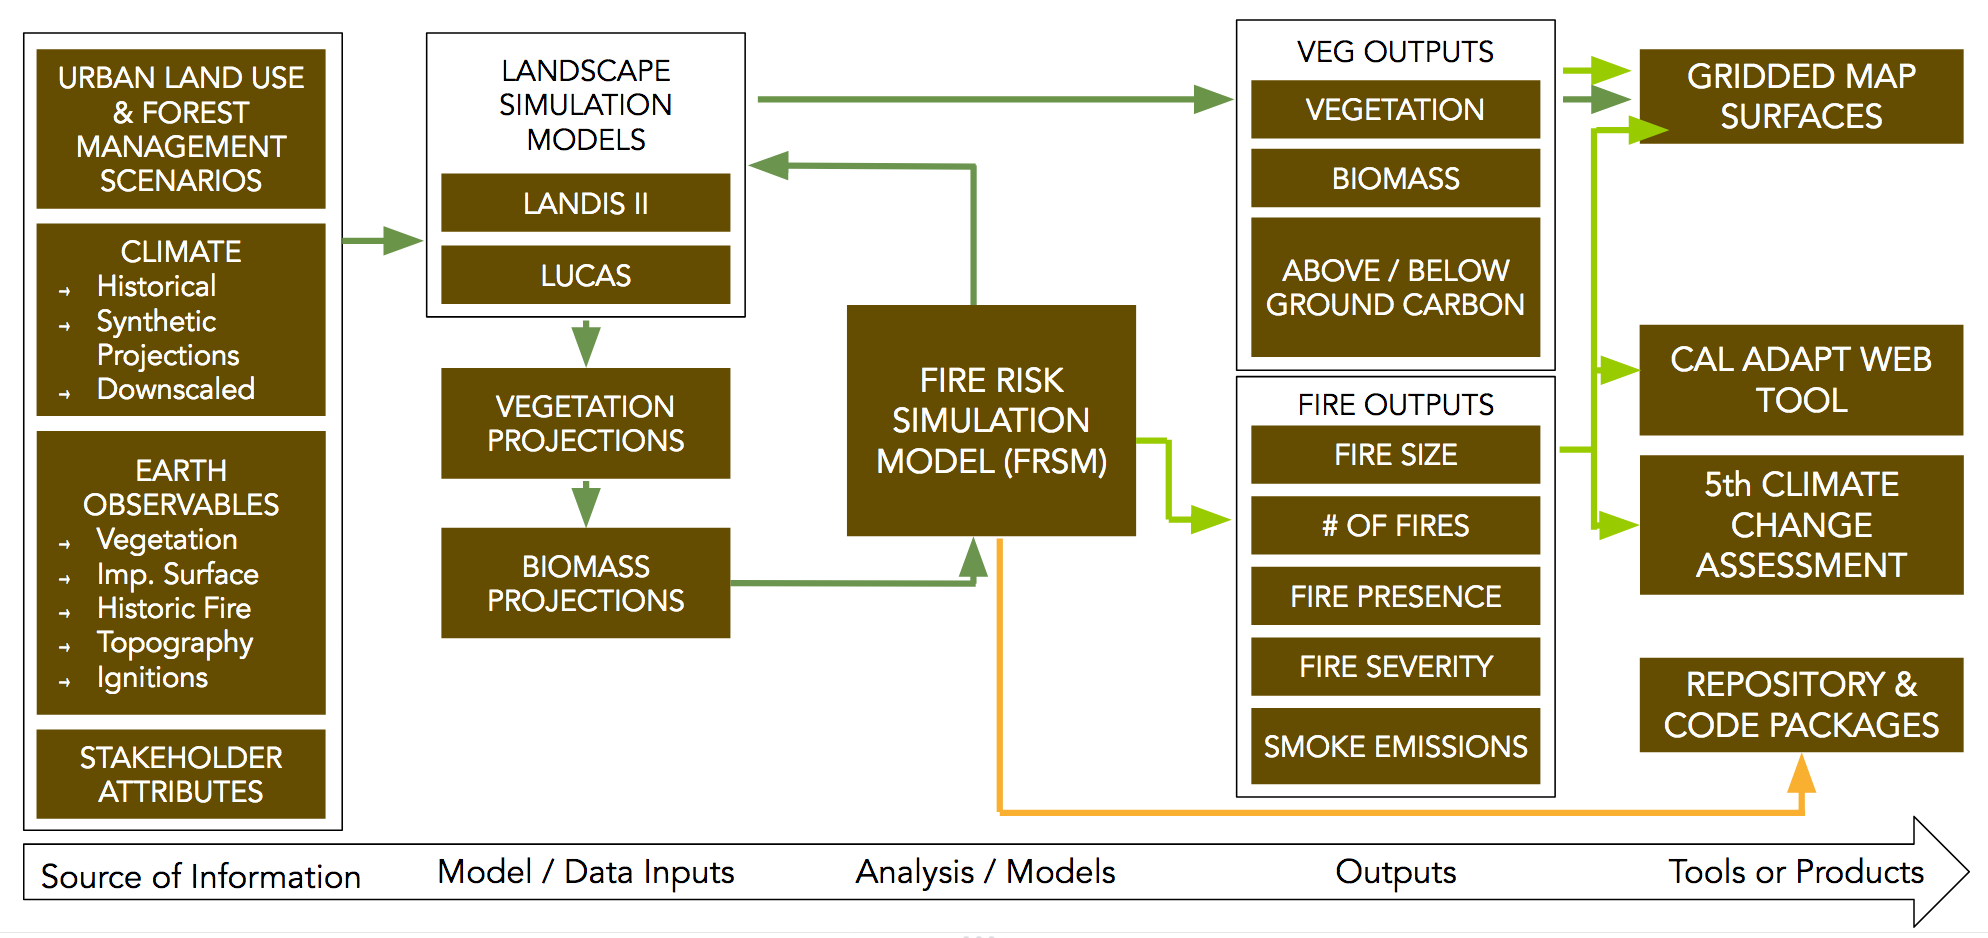 Outline of wildfire modeling process for California’s Fifth Climate Change Assessment